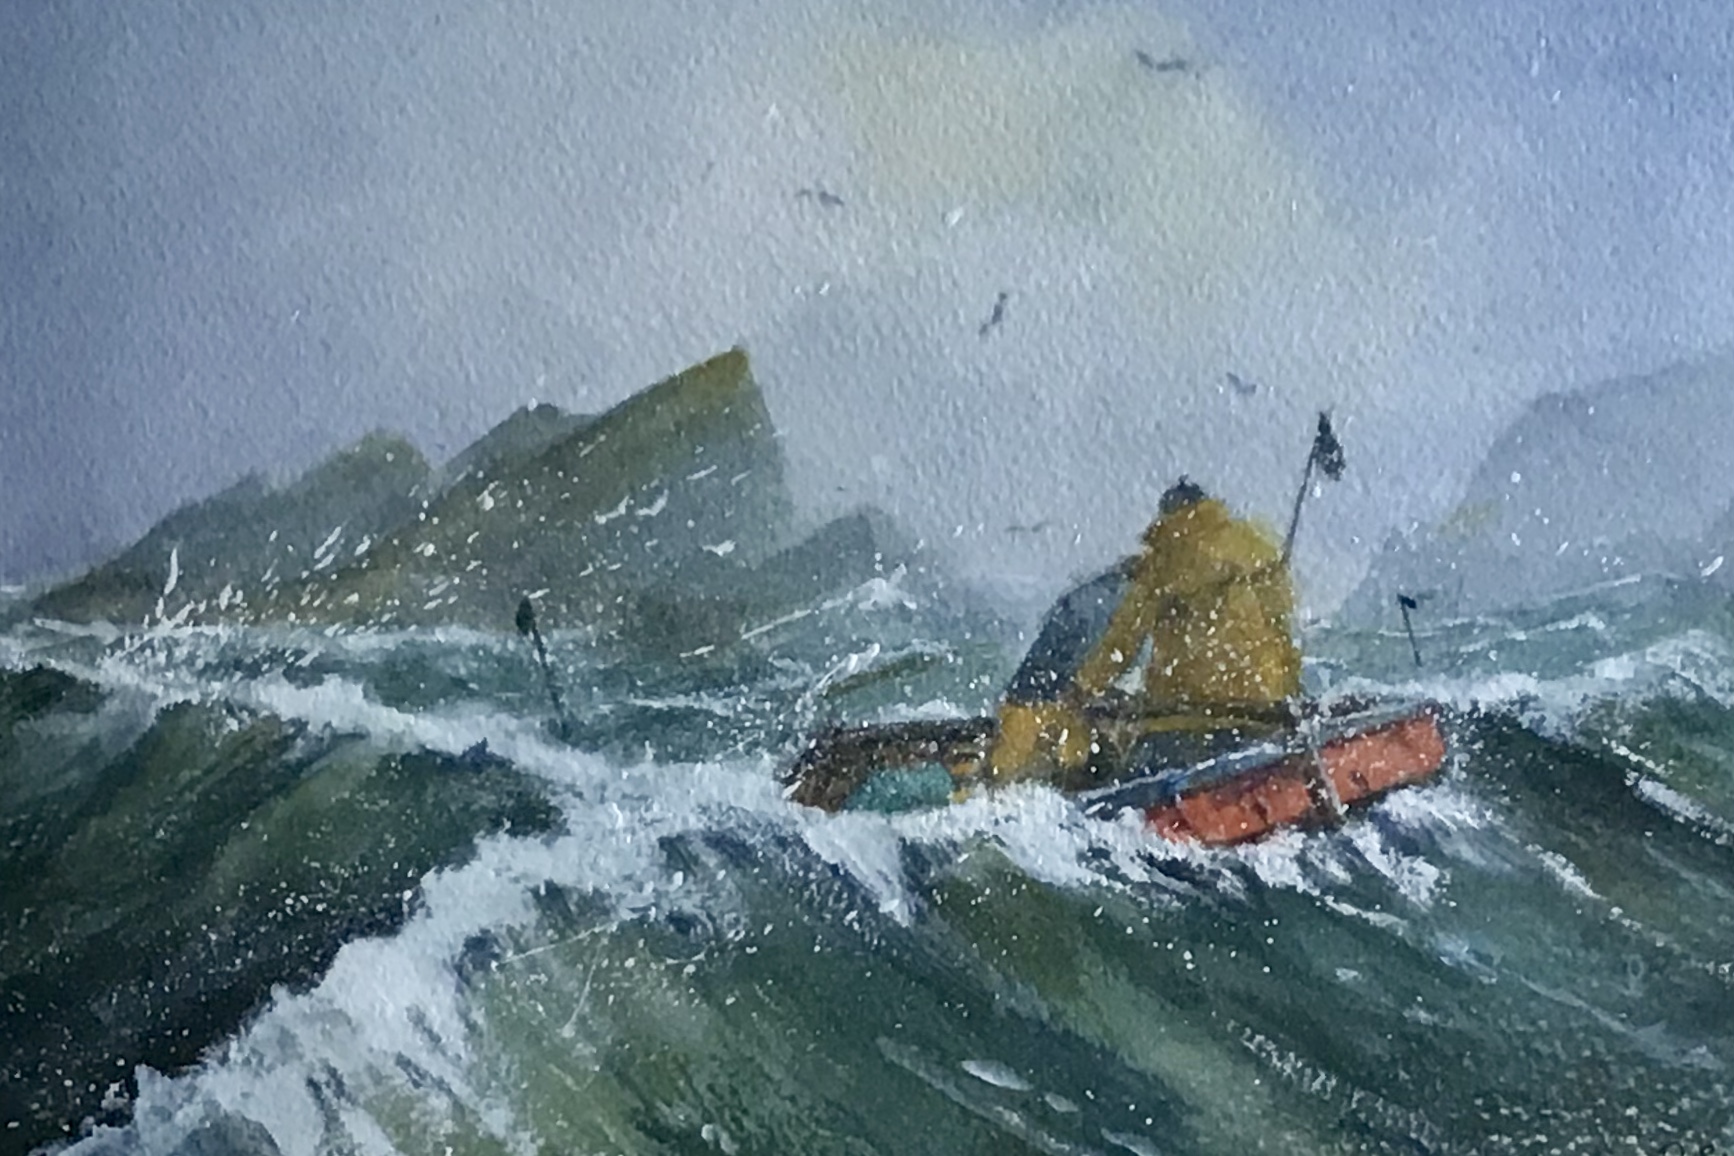 Painting of a rough sea